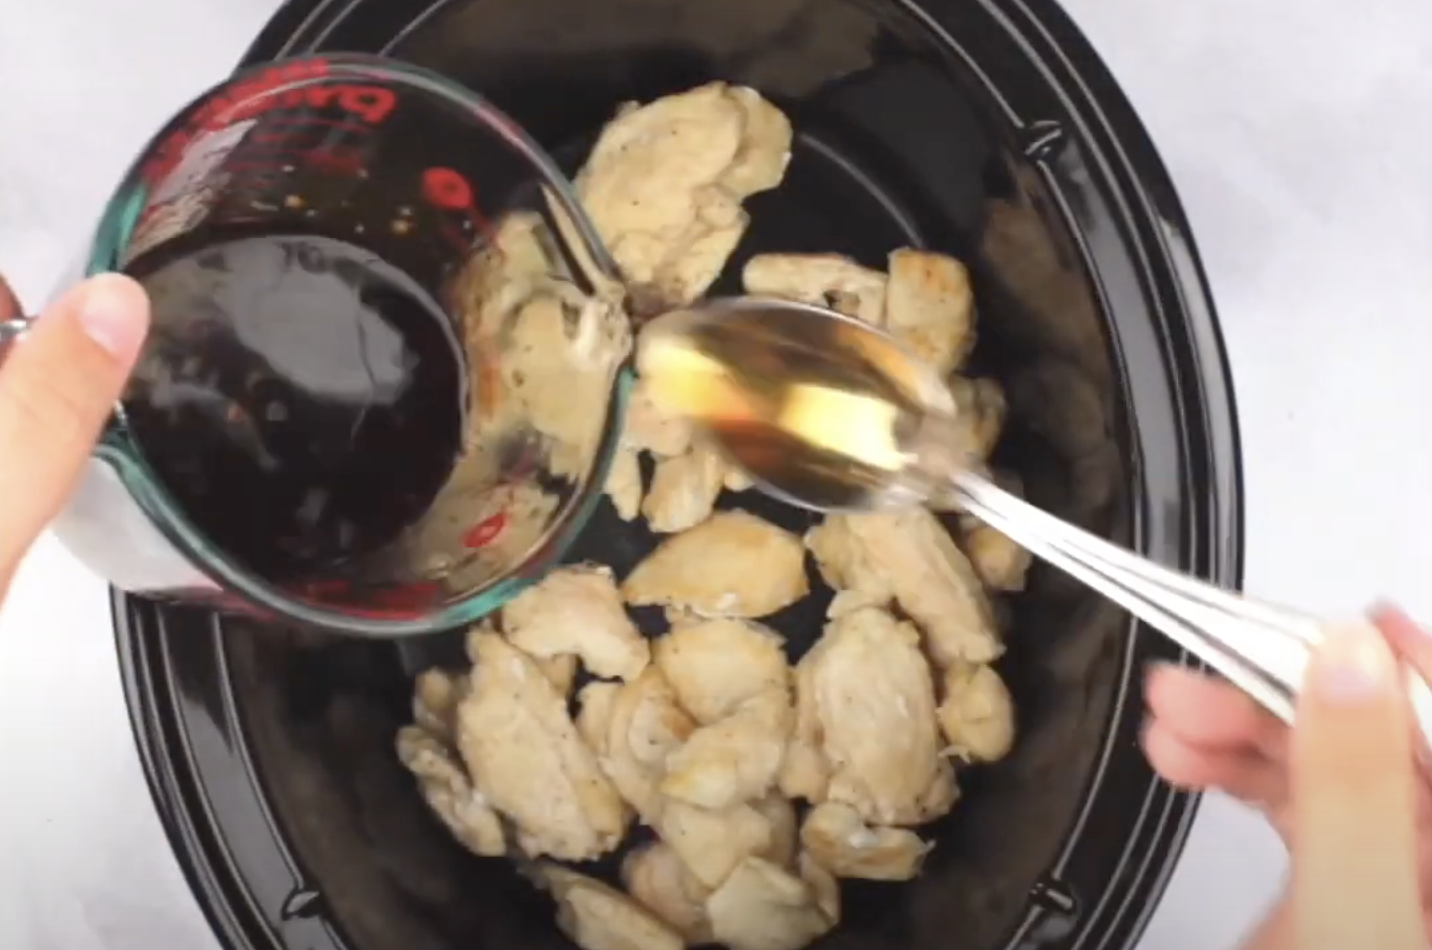 Chicken in a Crock Pot with sauce being poured over the top to make cashew chicken